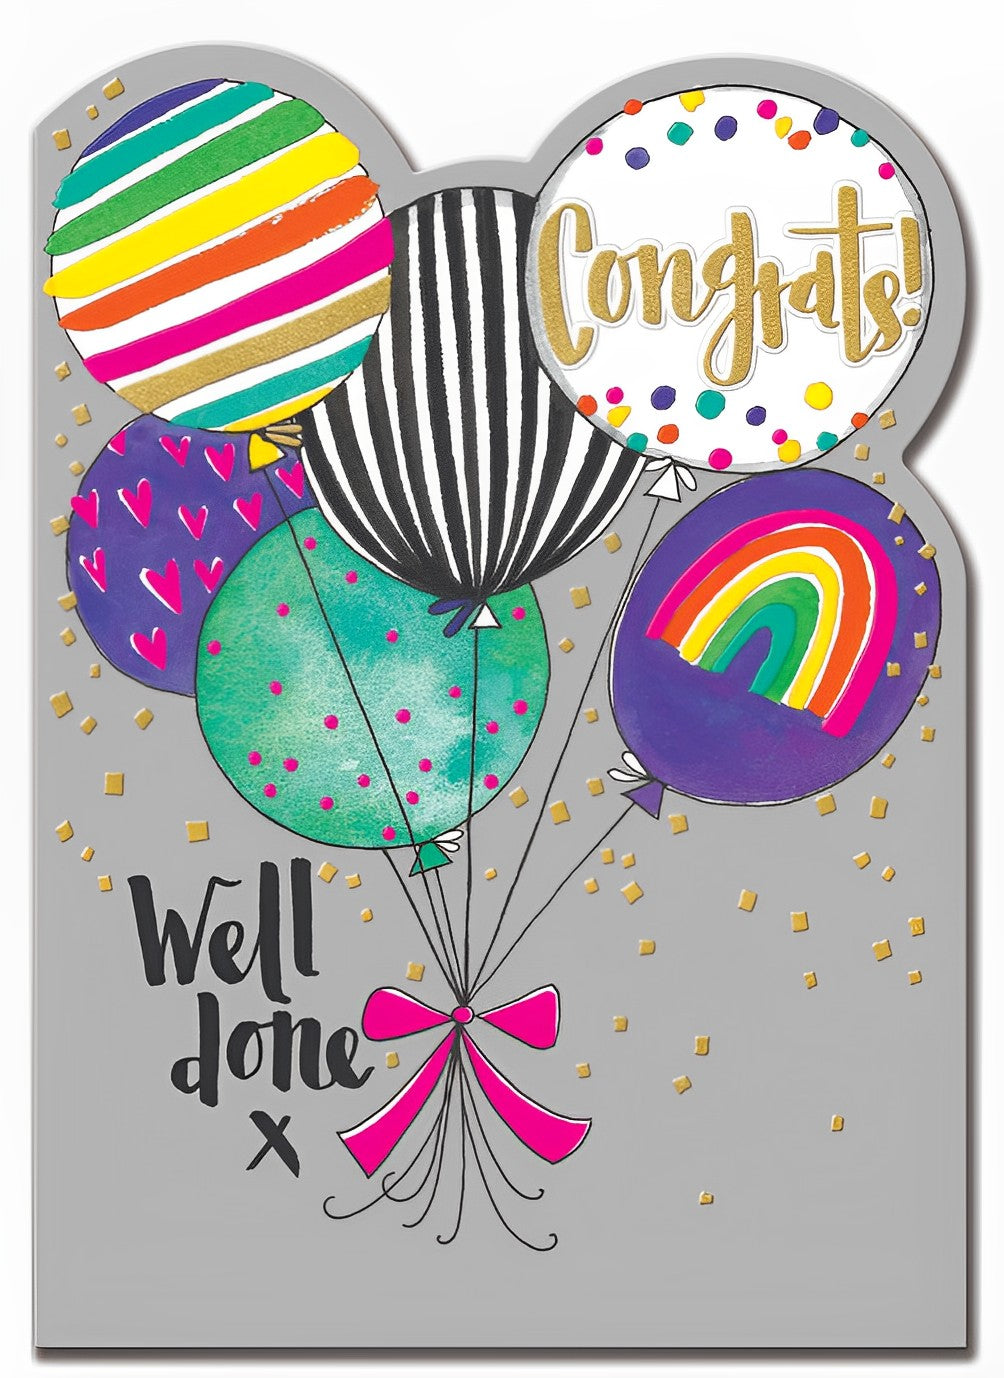 Congrats Well Done Balloons Cut Out Card from Penny Black